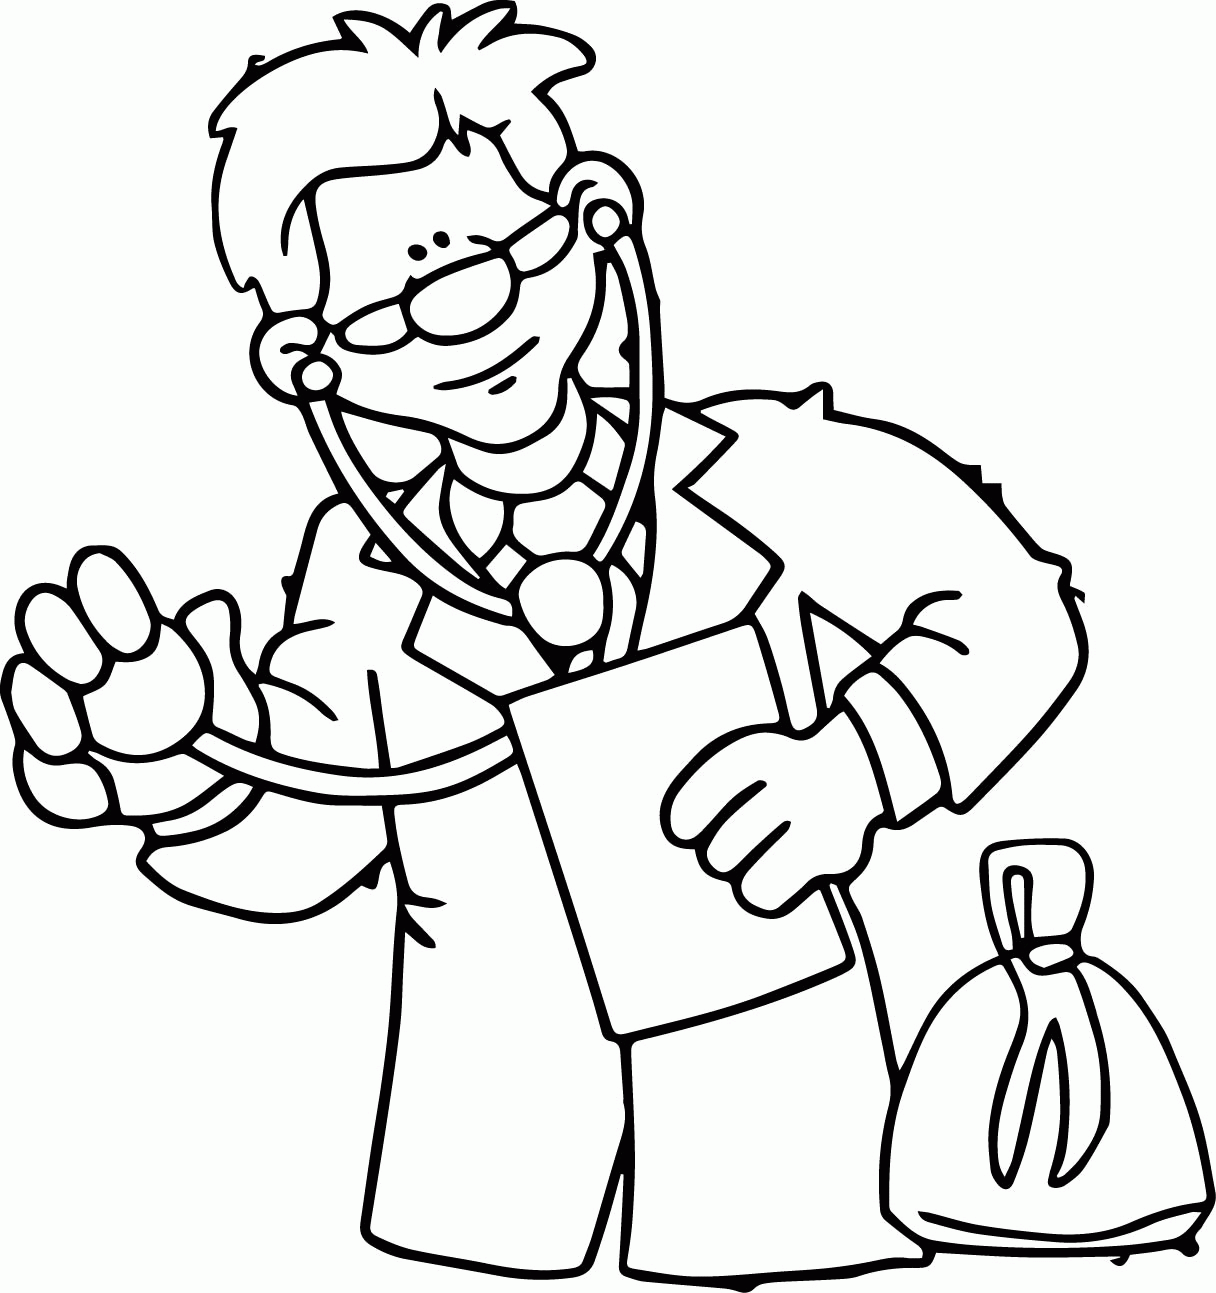 Doctor Coloring Page Free Printable Coloring Pages For Kids